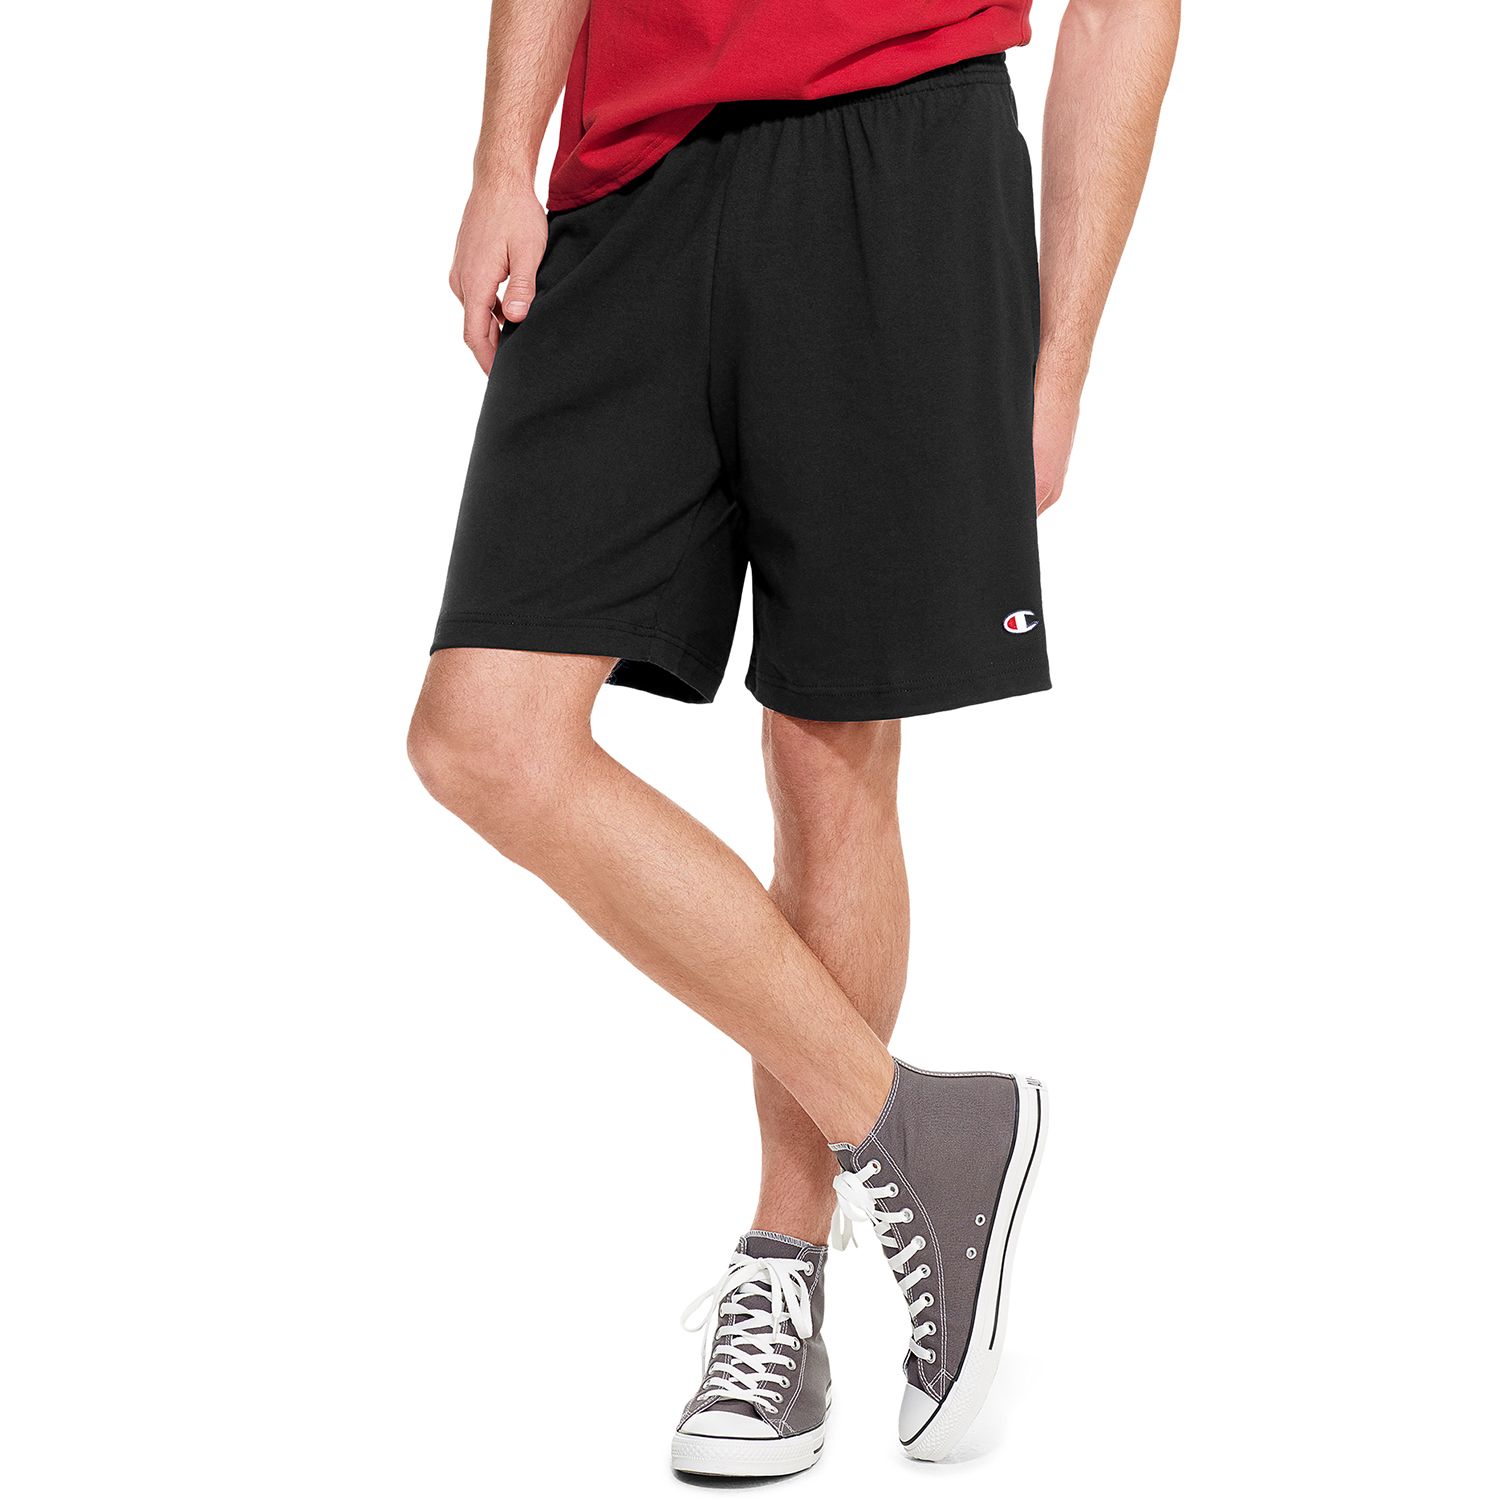 champion men's rugby shorts with pockets